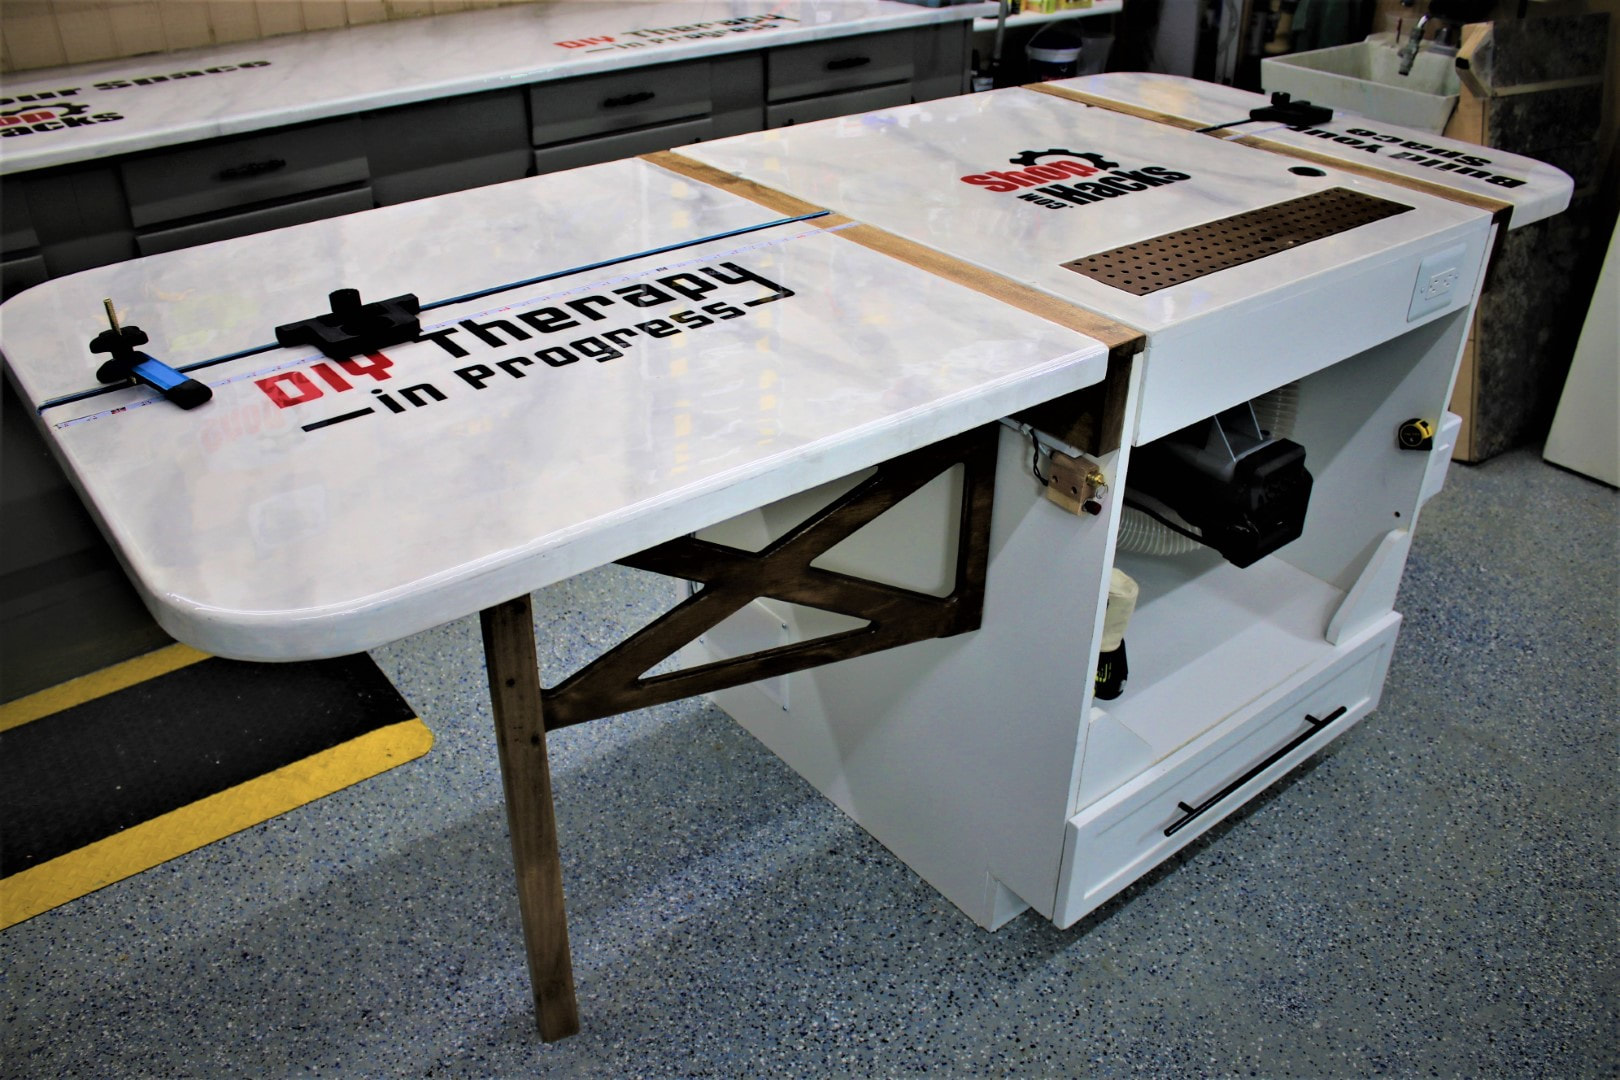 The Ultimate Multifunction Flip Top Workbench - PDF Plans